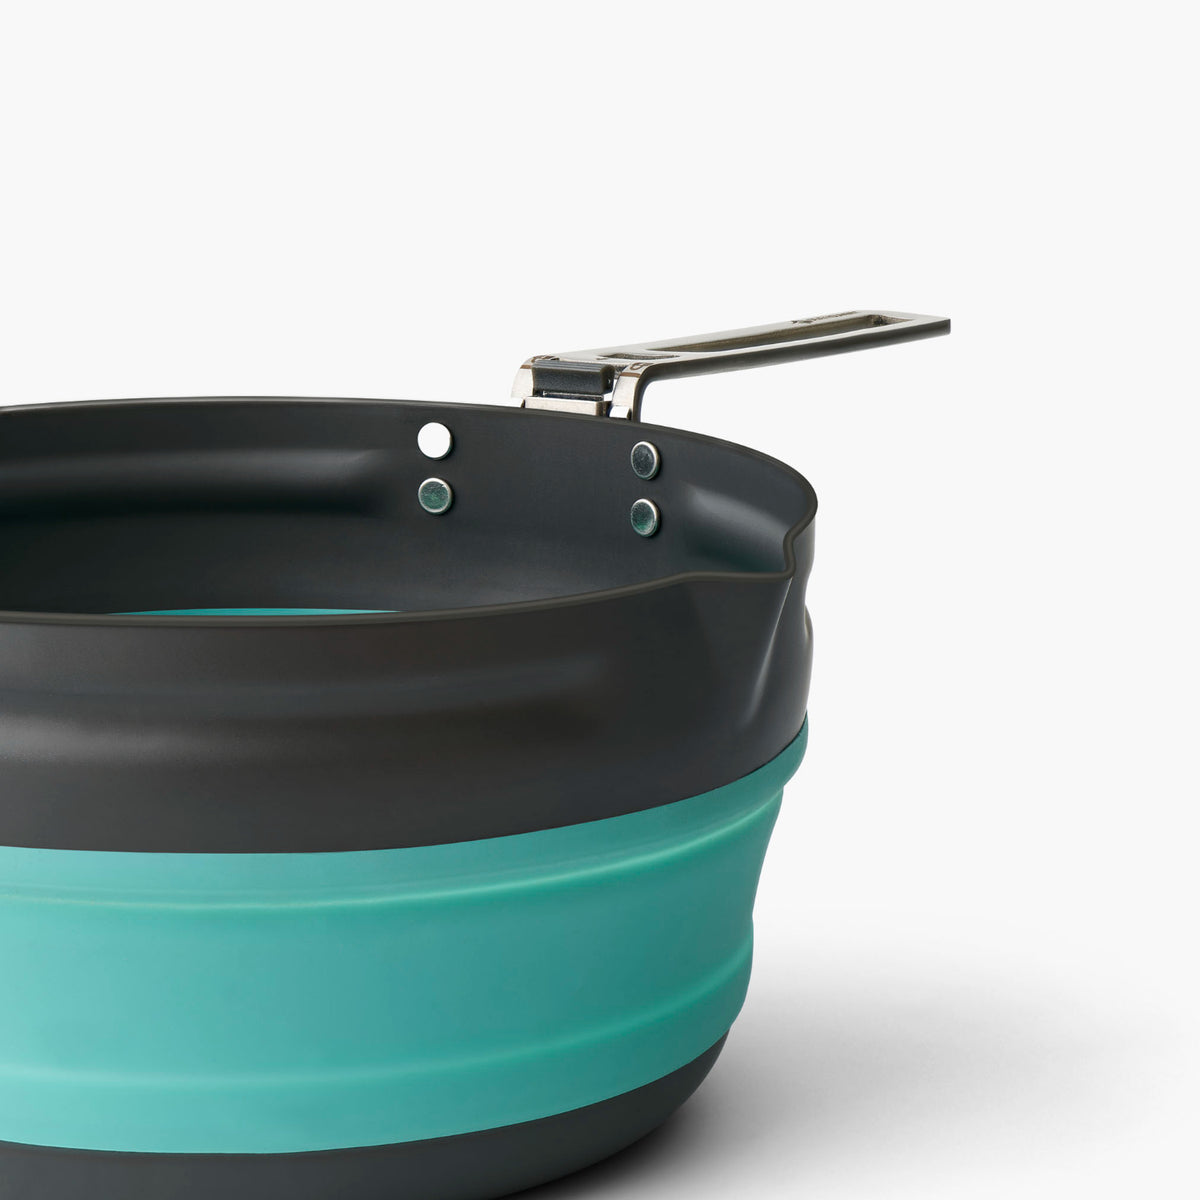 Sea to Summit Frontier Collapsible 2.2L Pouring Pot